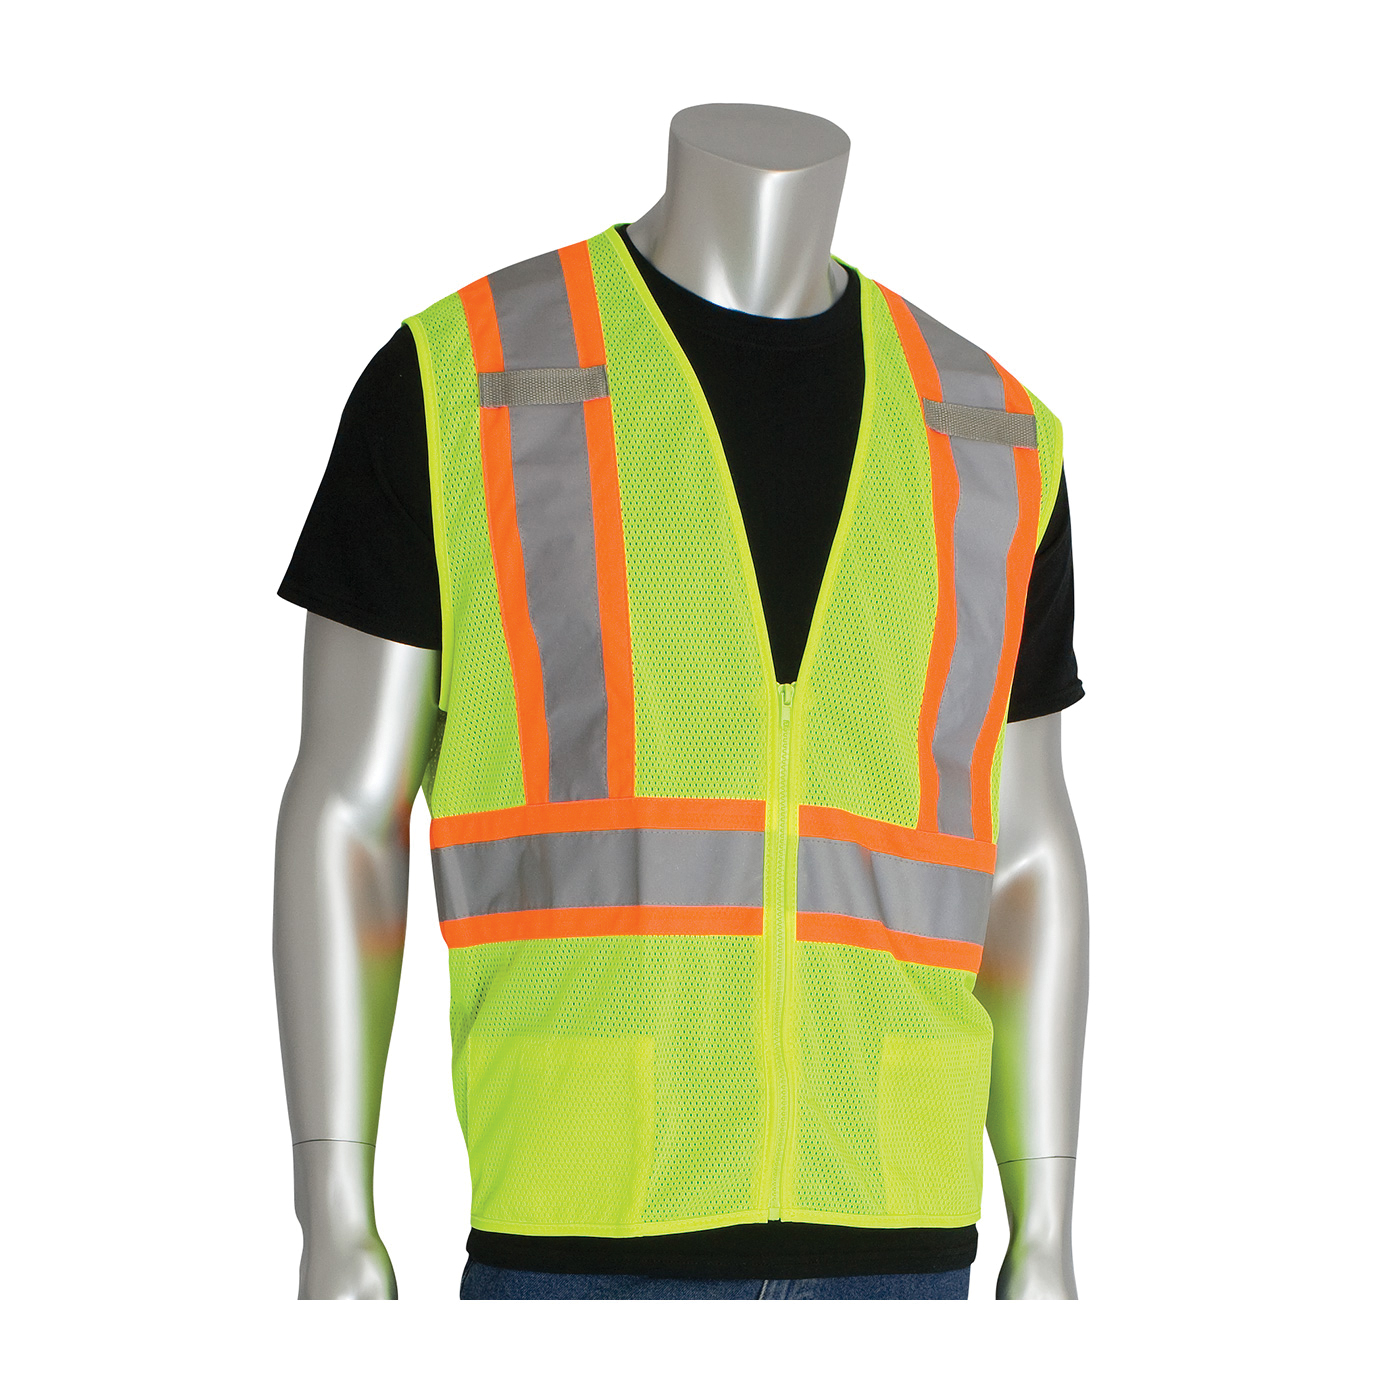 PIP® 302-0600D-LY/5X 2-Tone Safety Access Vest With "D" Ring Access, 5XL, Hi-Viz Lime Yellow, Polyester, Zipper Closure, 2 Pockets, ANSI Class: Class 2, Specifications Met: ANSI 107 Type R